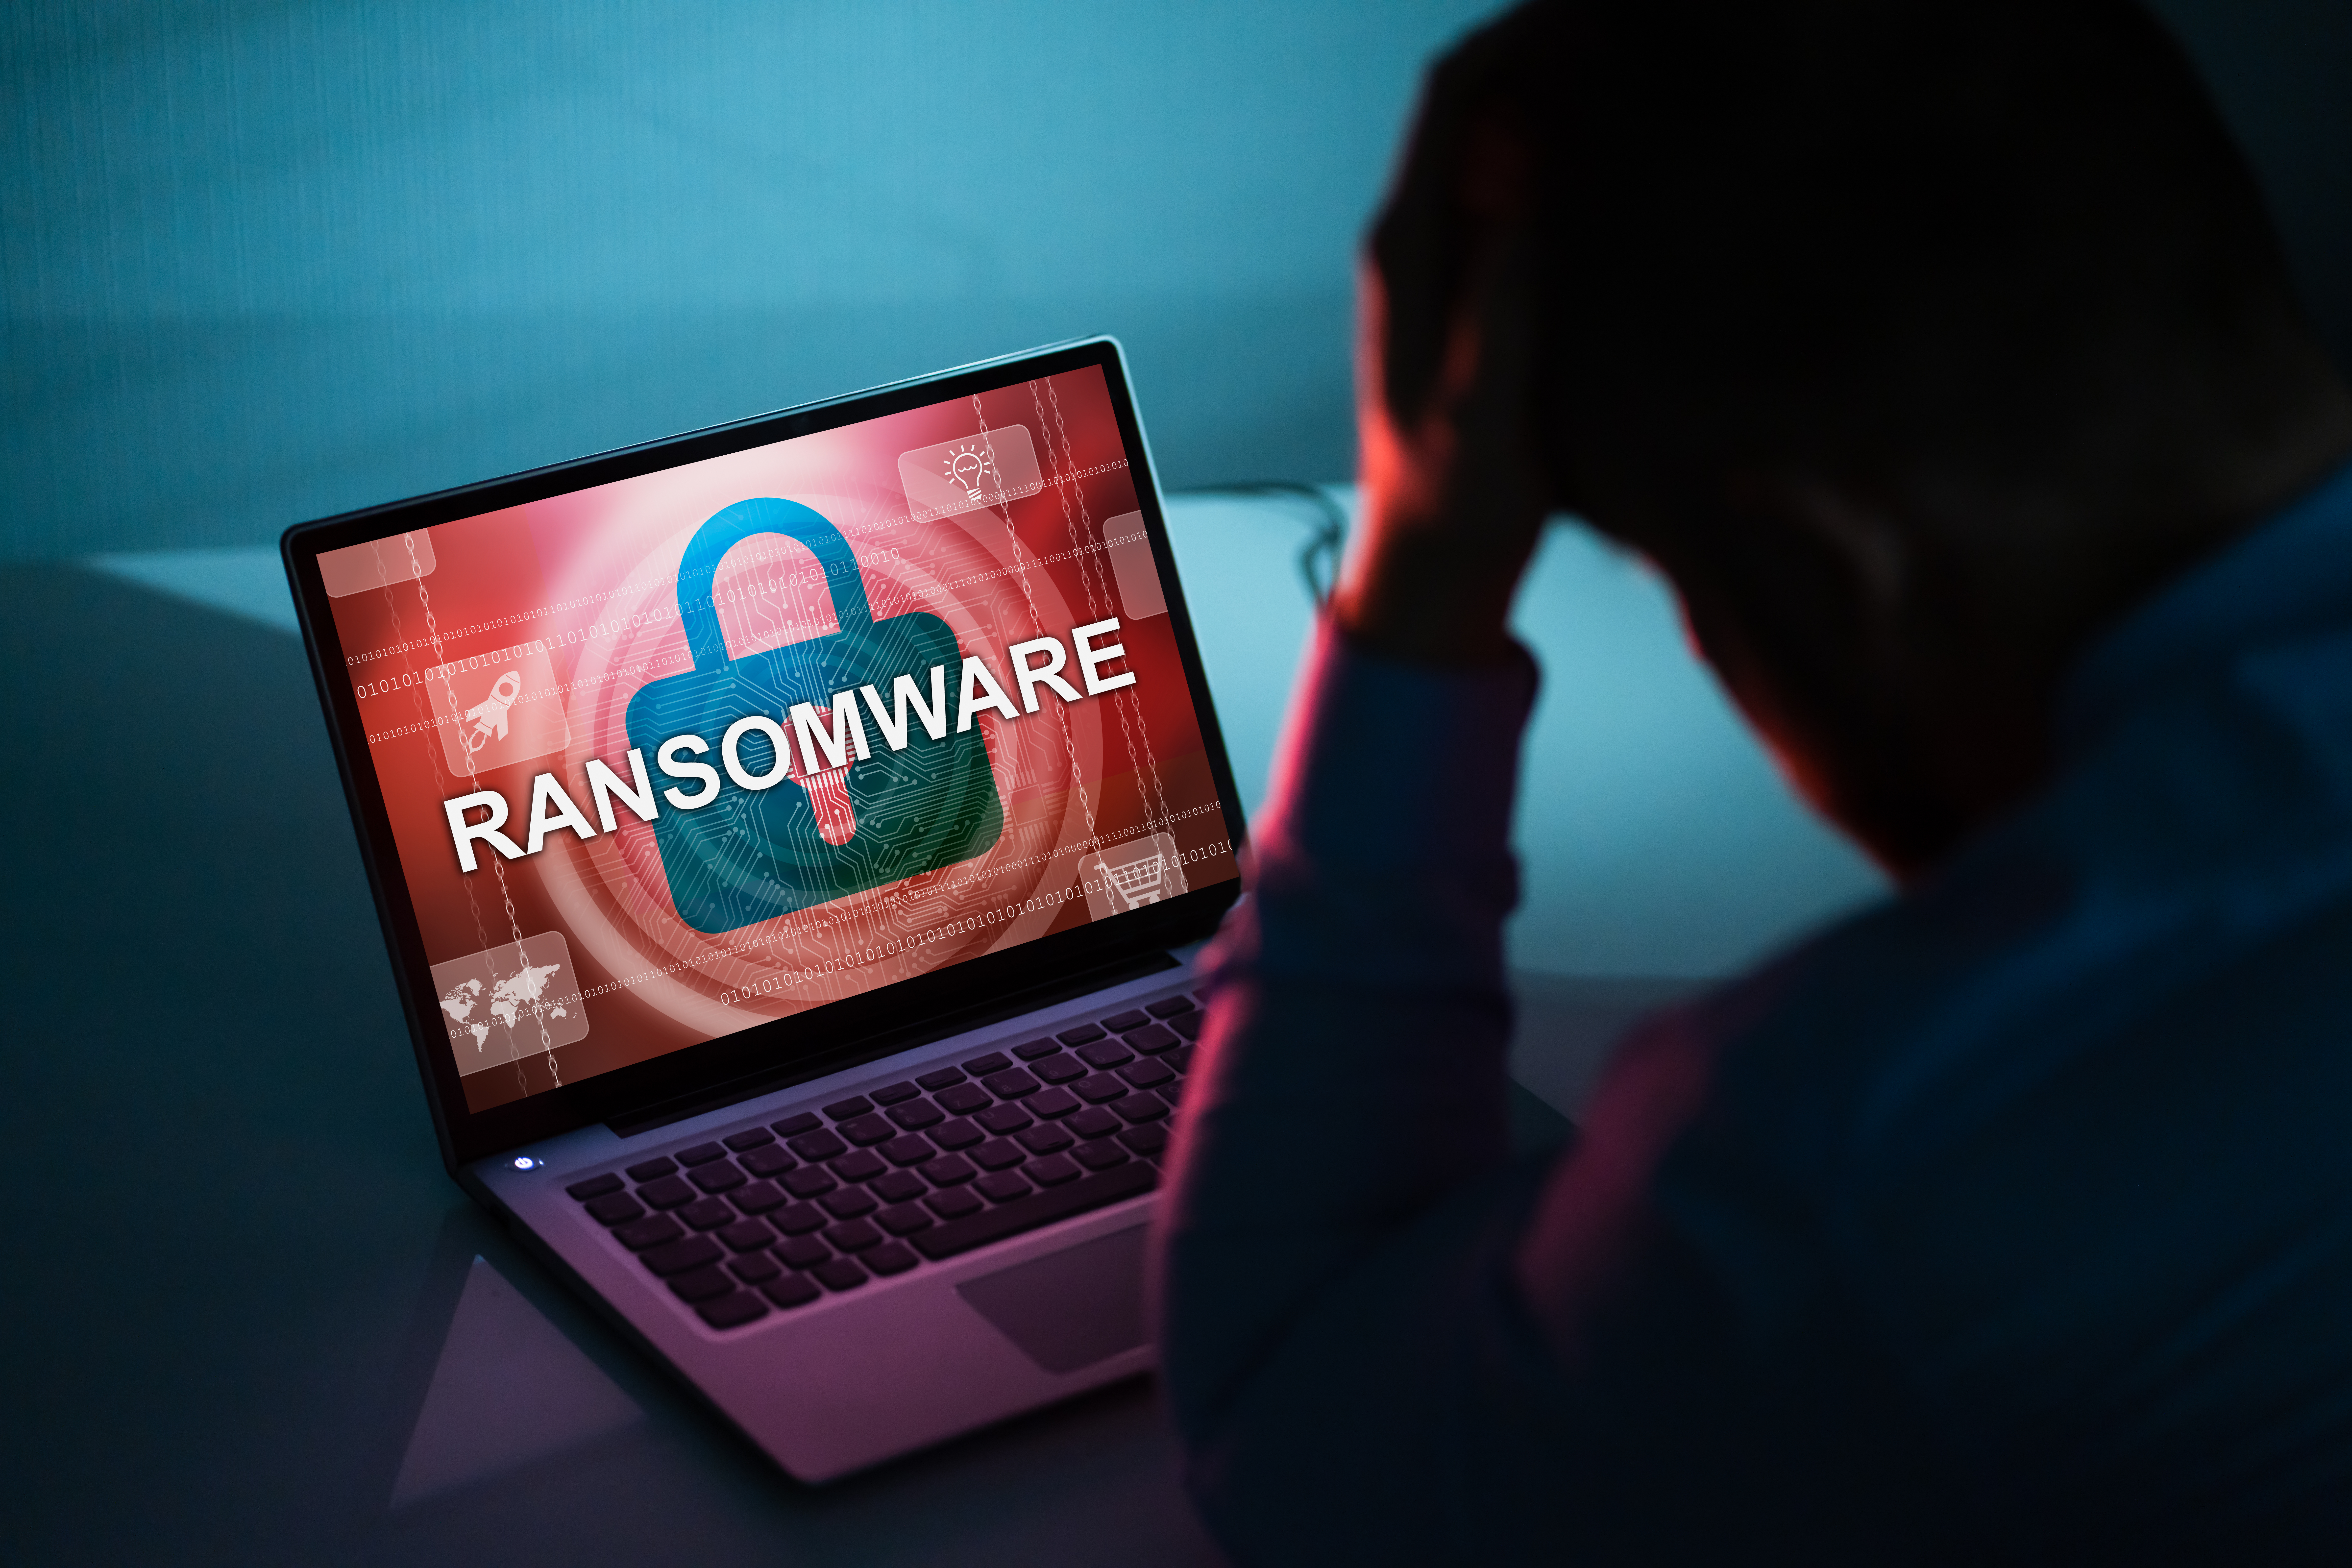 How does N4L help protect schools against ransomware?